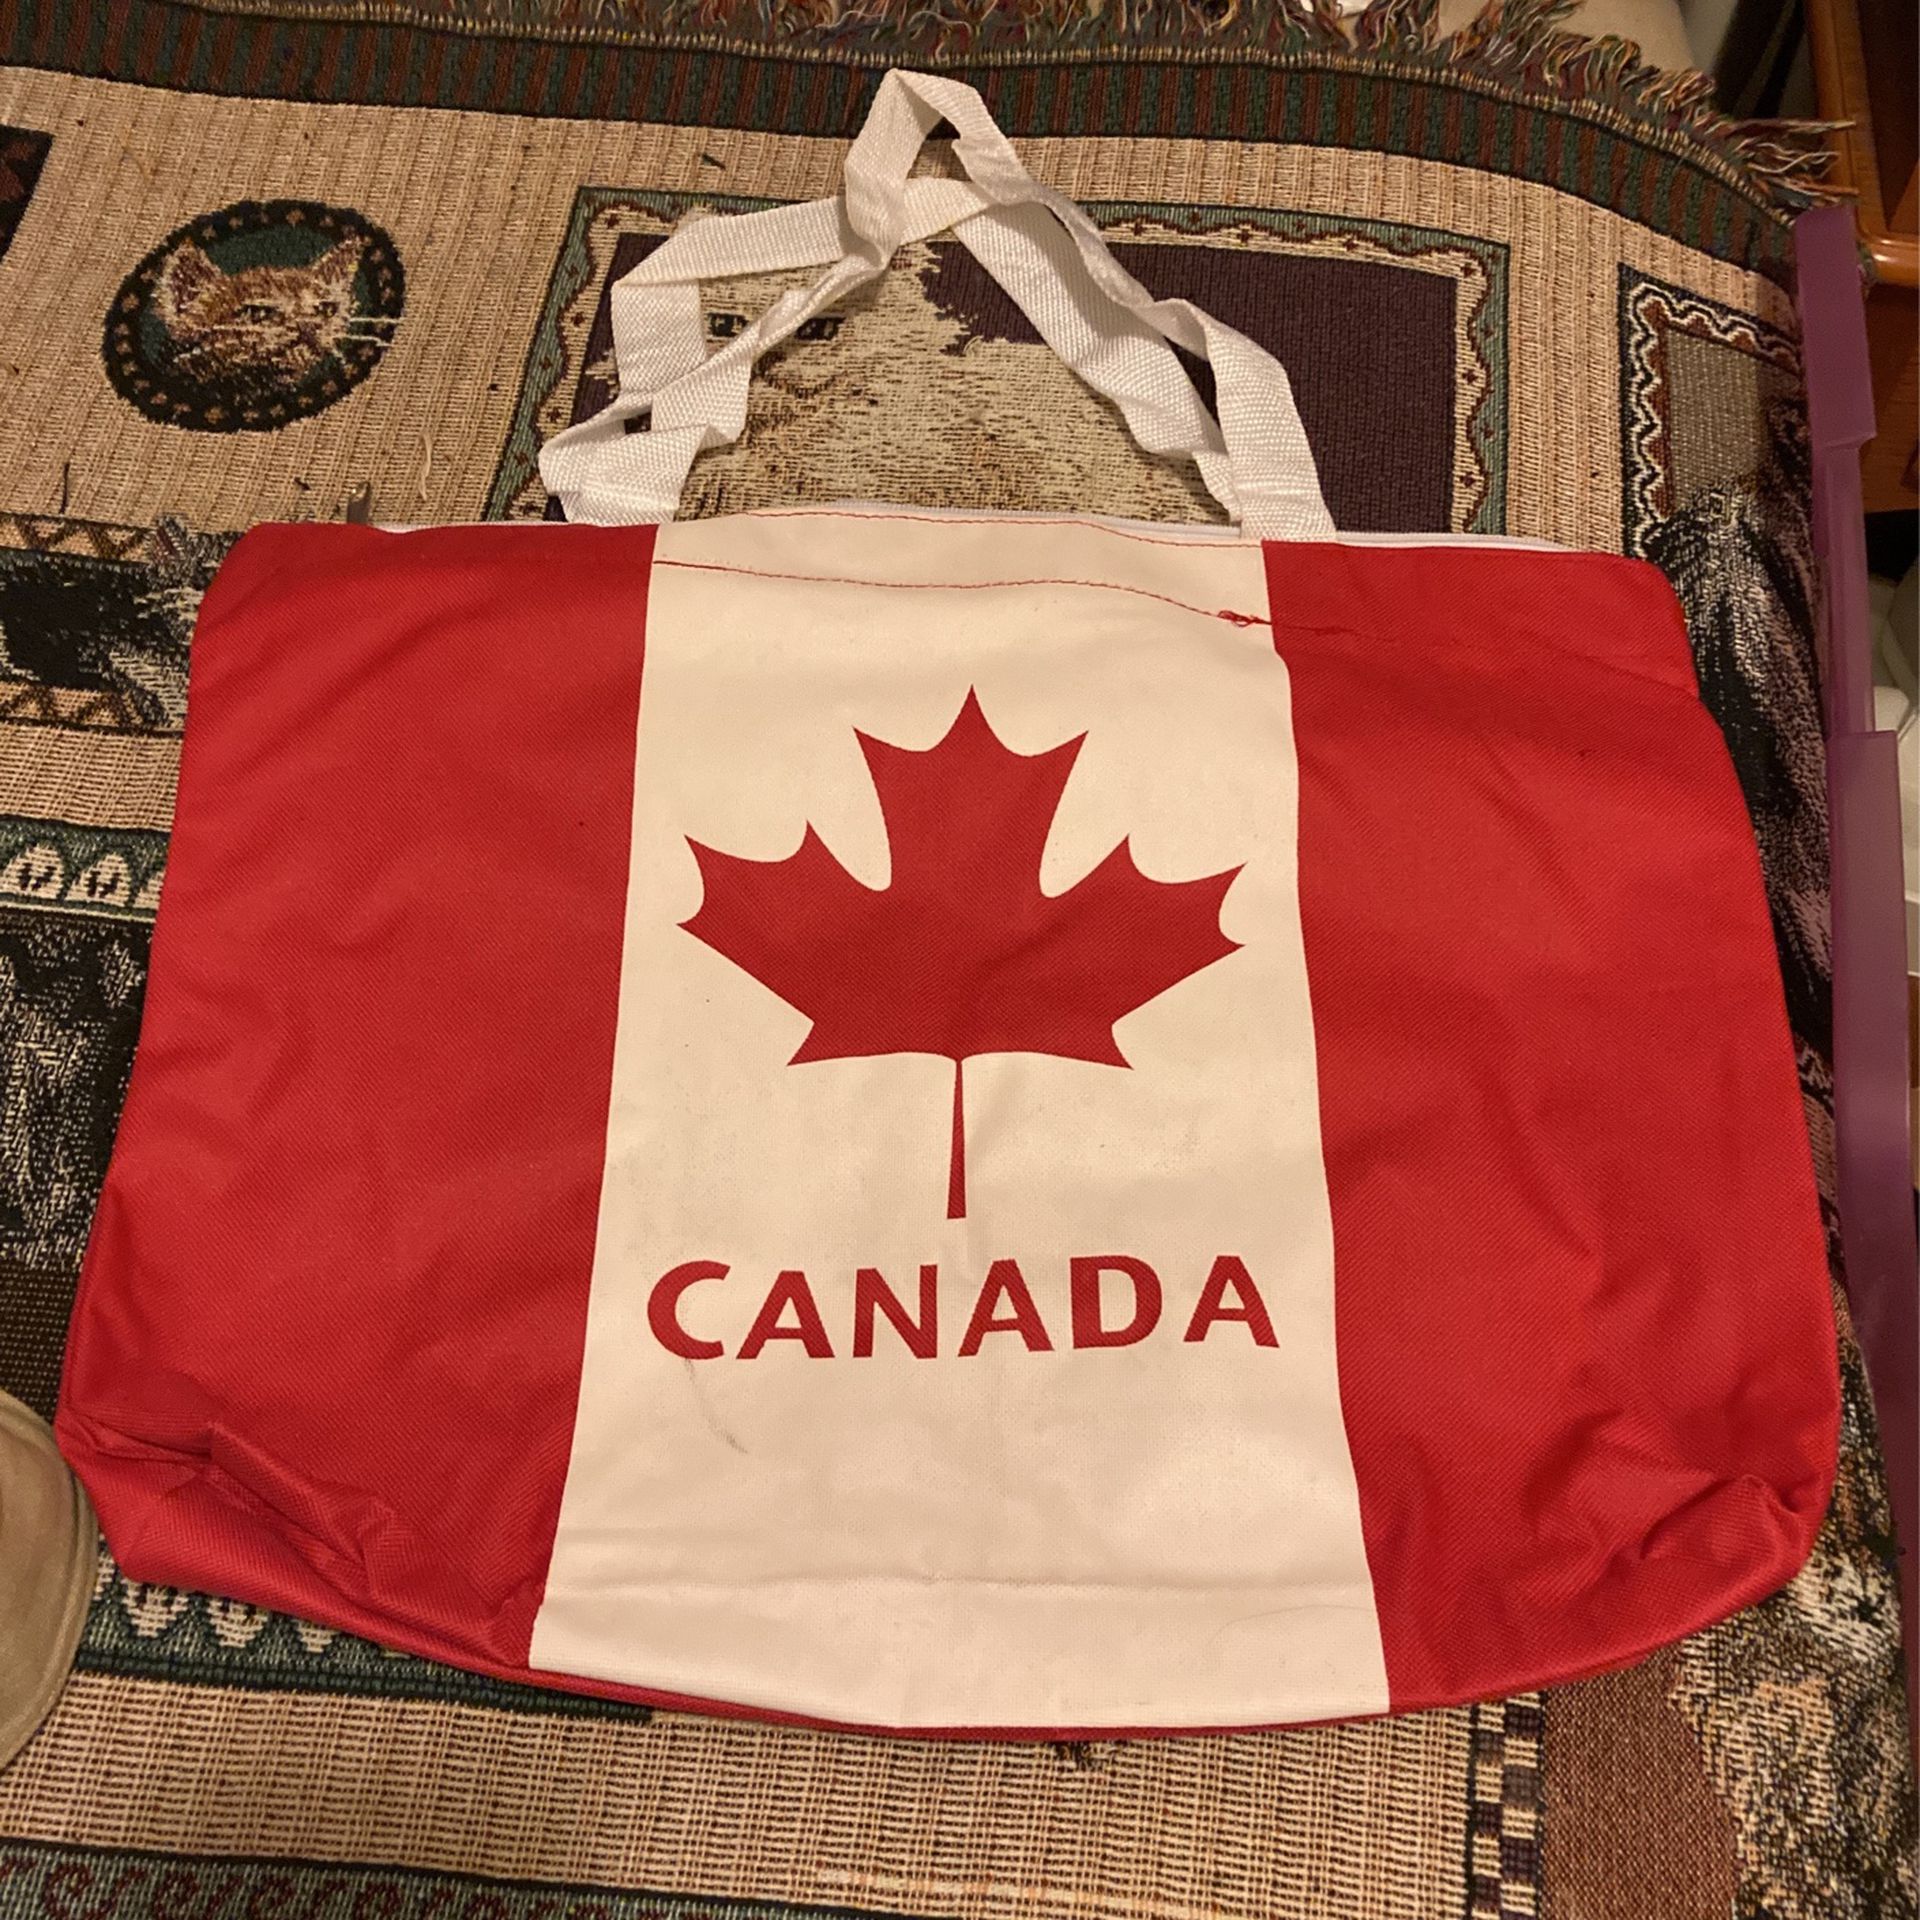 Canada Tote Bag Great For Groceries Or Carrying Books